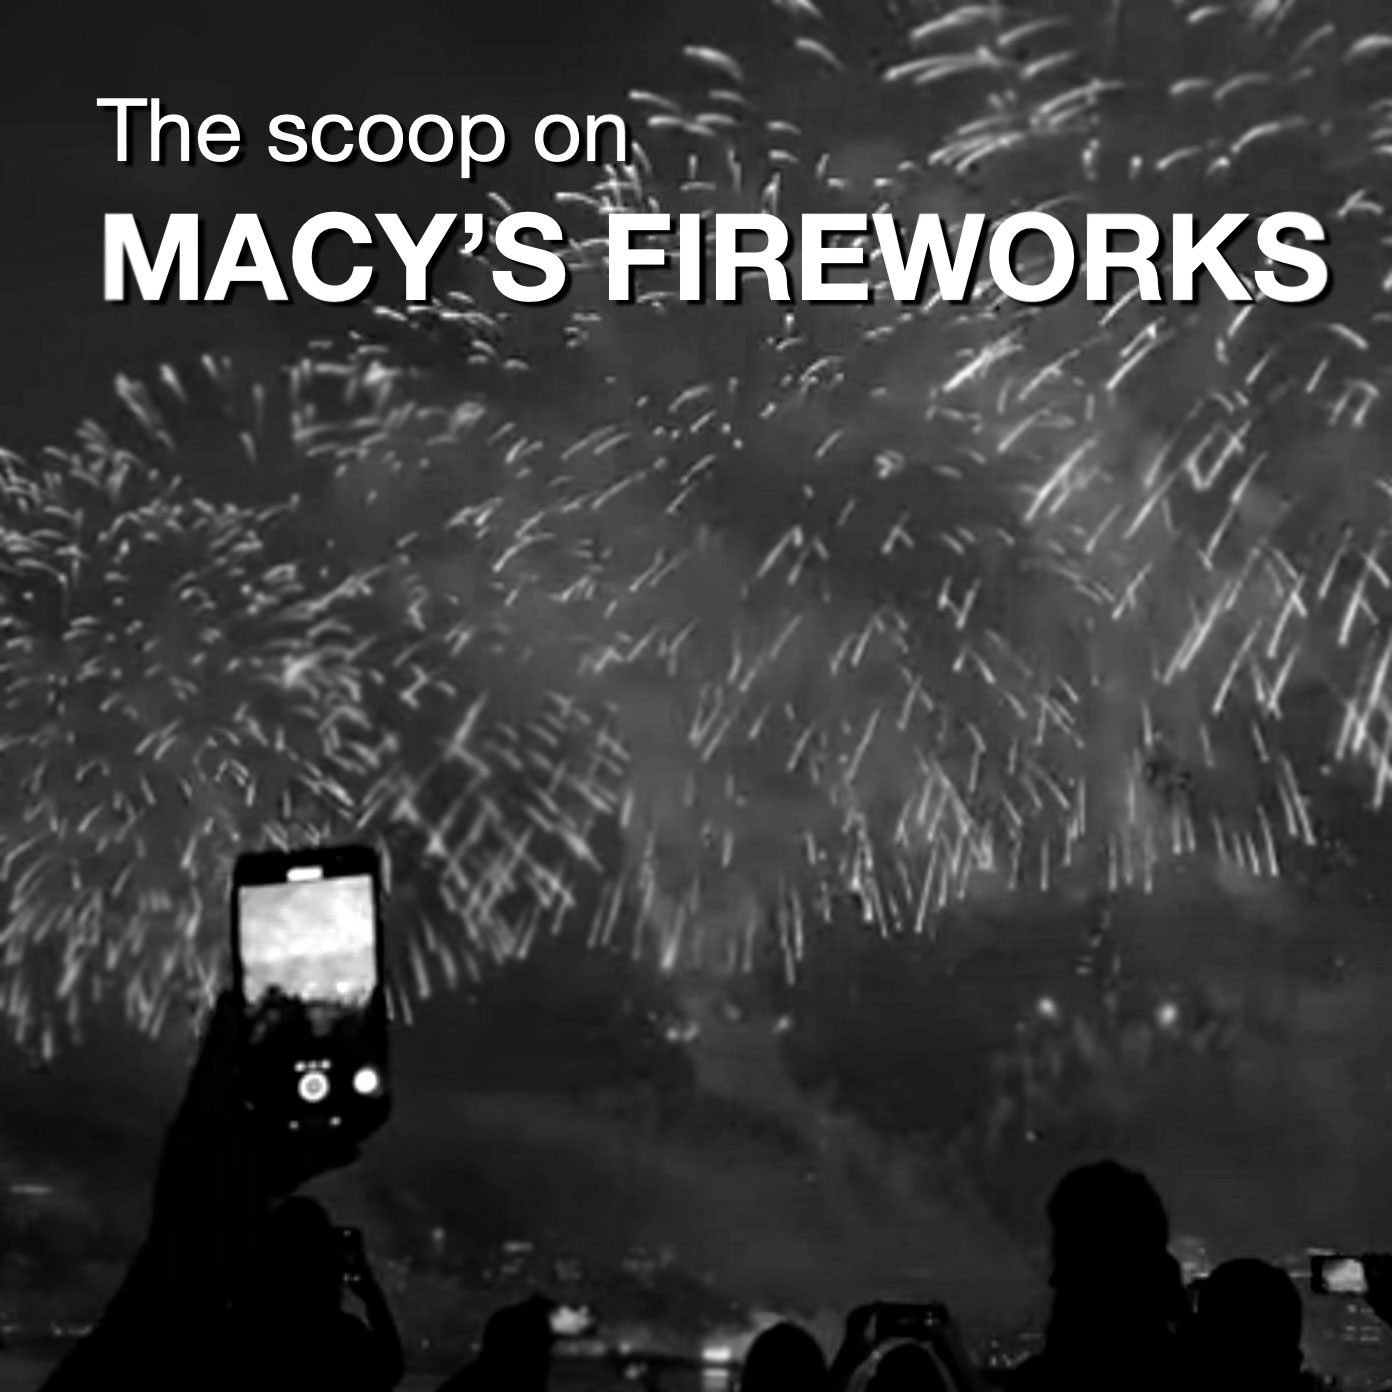 Here's the scoop on this years Macy's 4th of July Fireworks